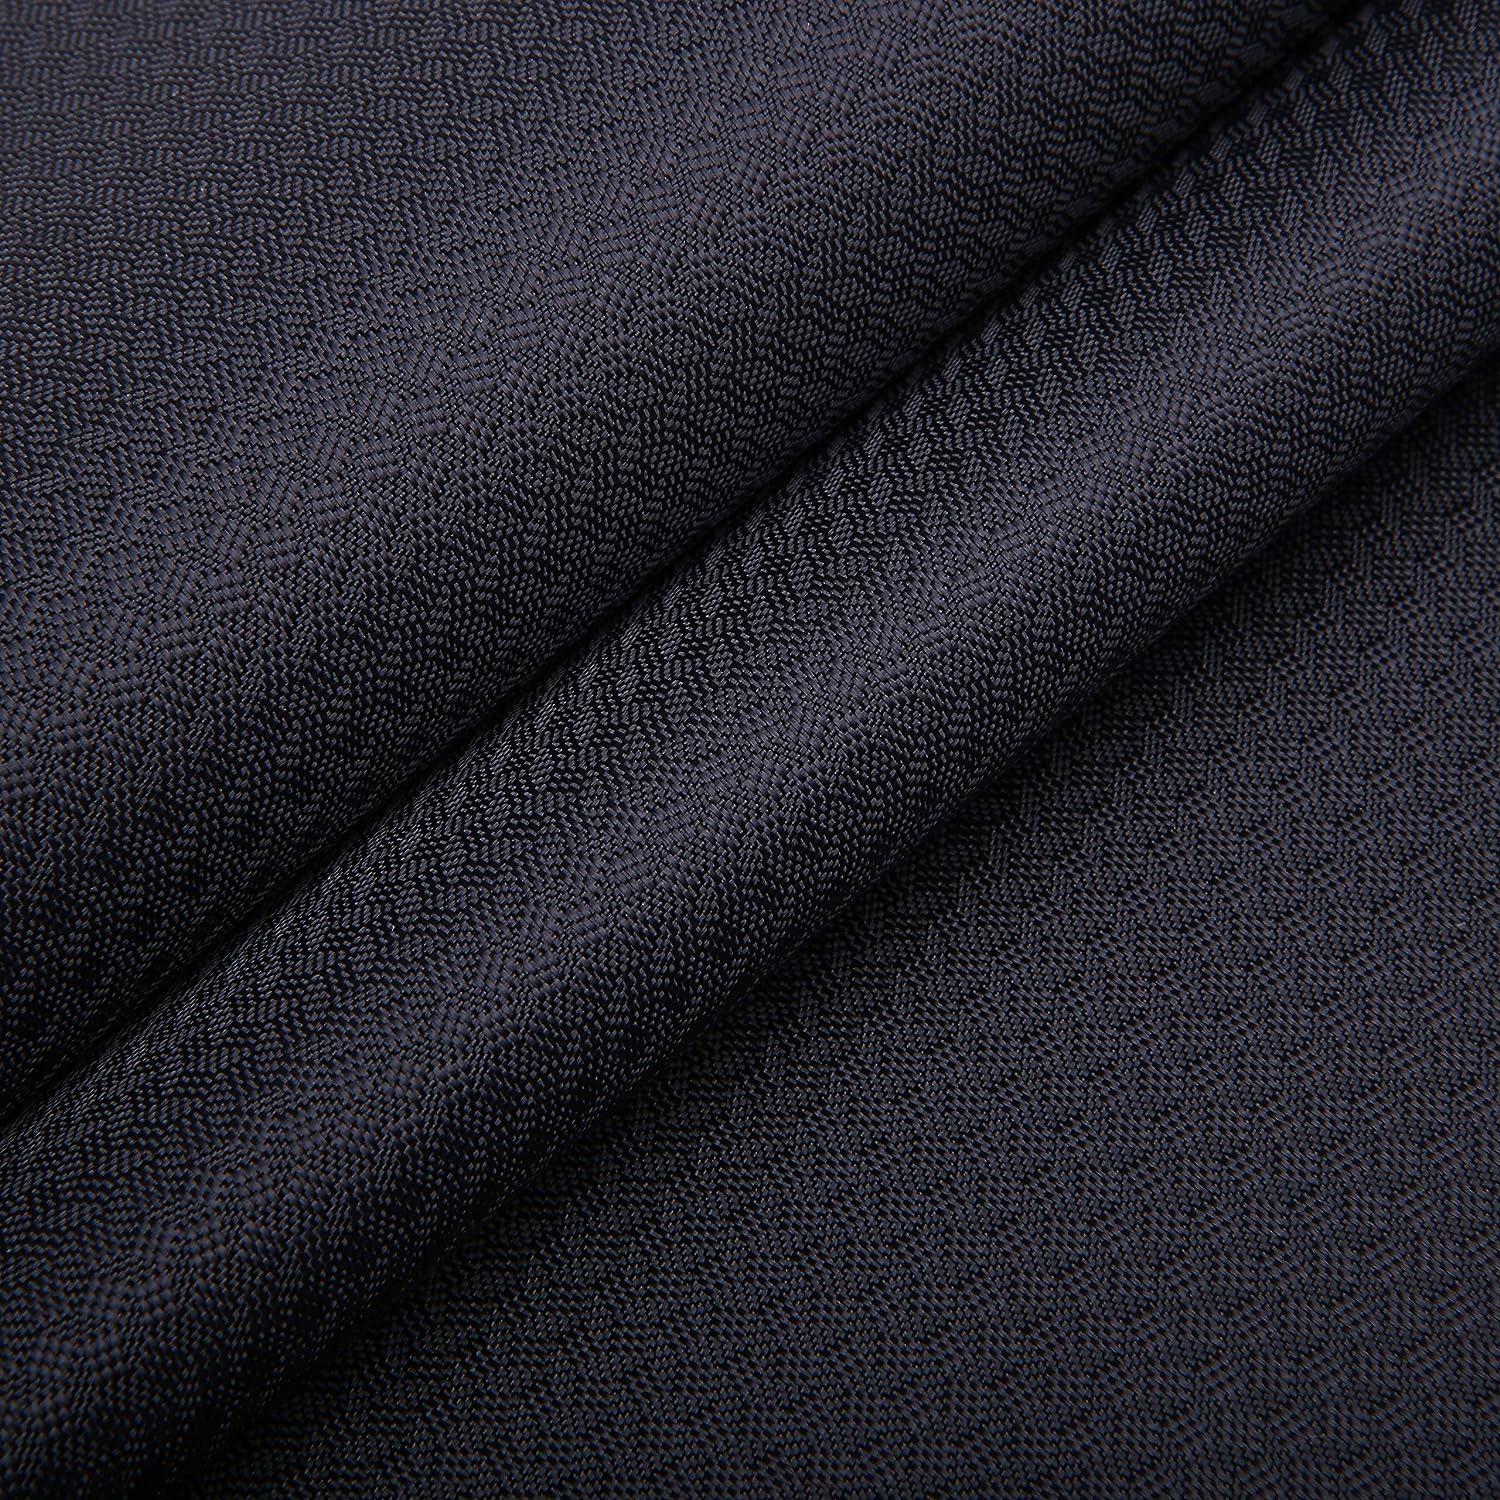 Solid Black Ripstop Nylon Fabric | Indoor / Outdoor | Backpacks / Banners |  54 Wide | By the Yard